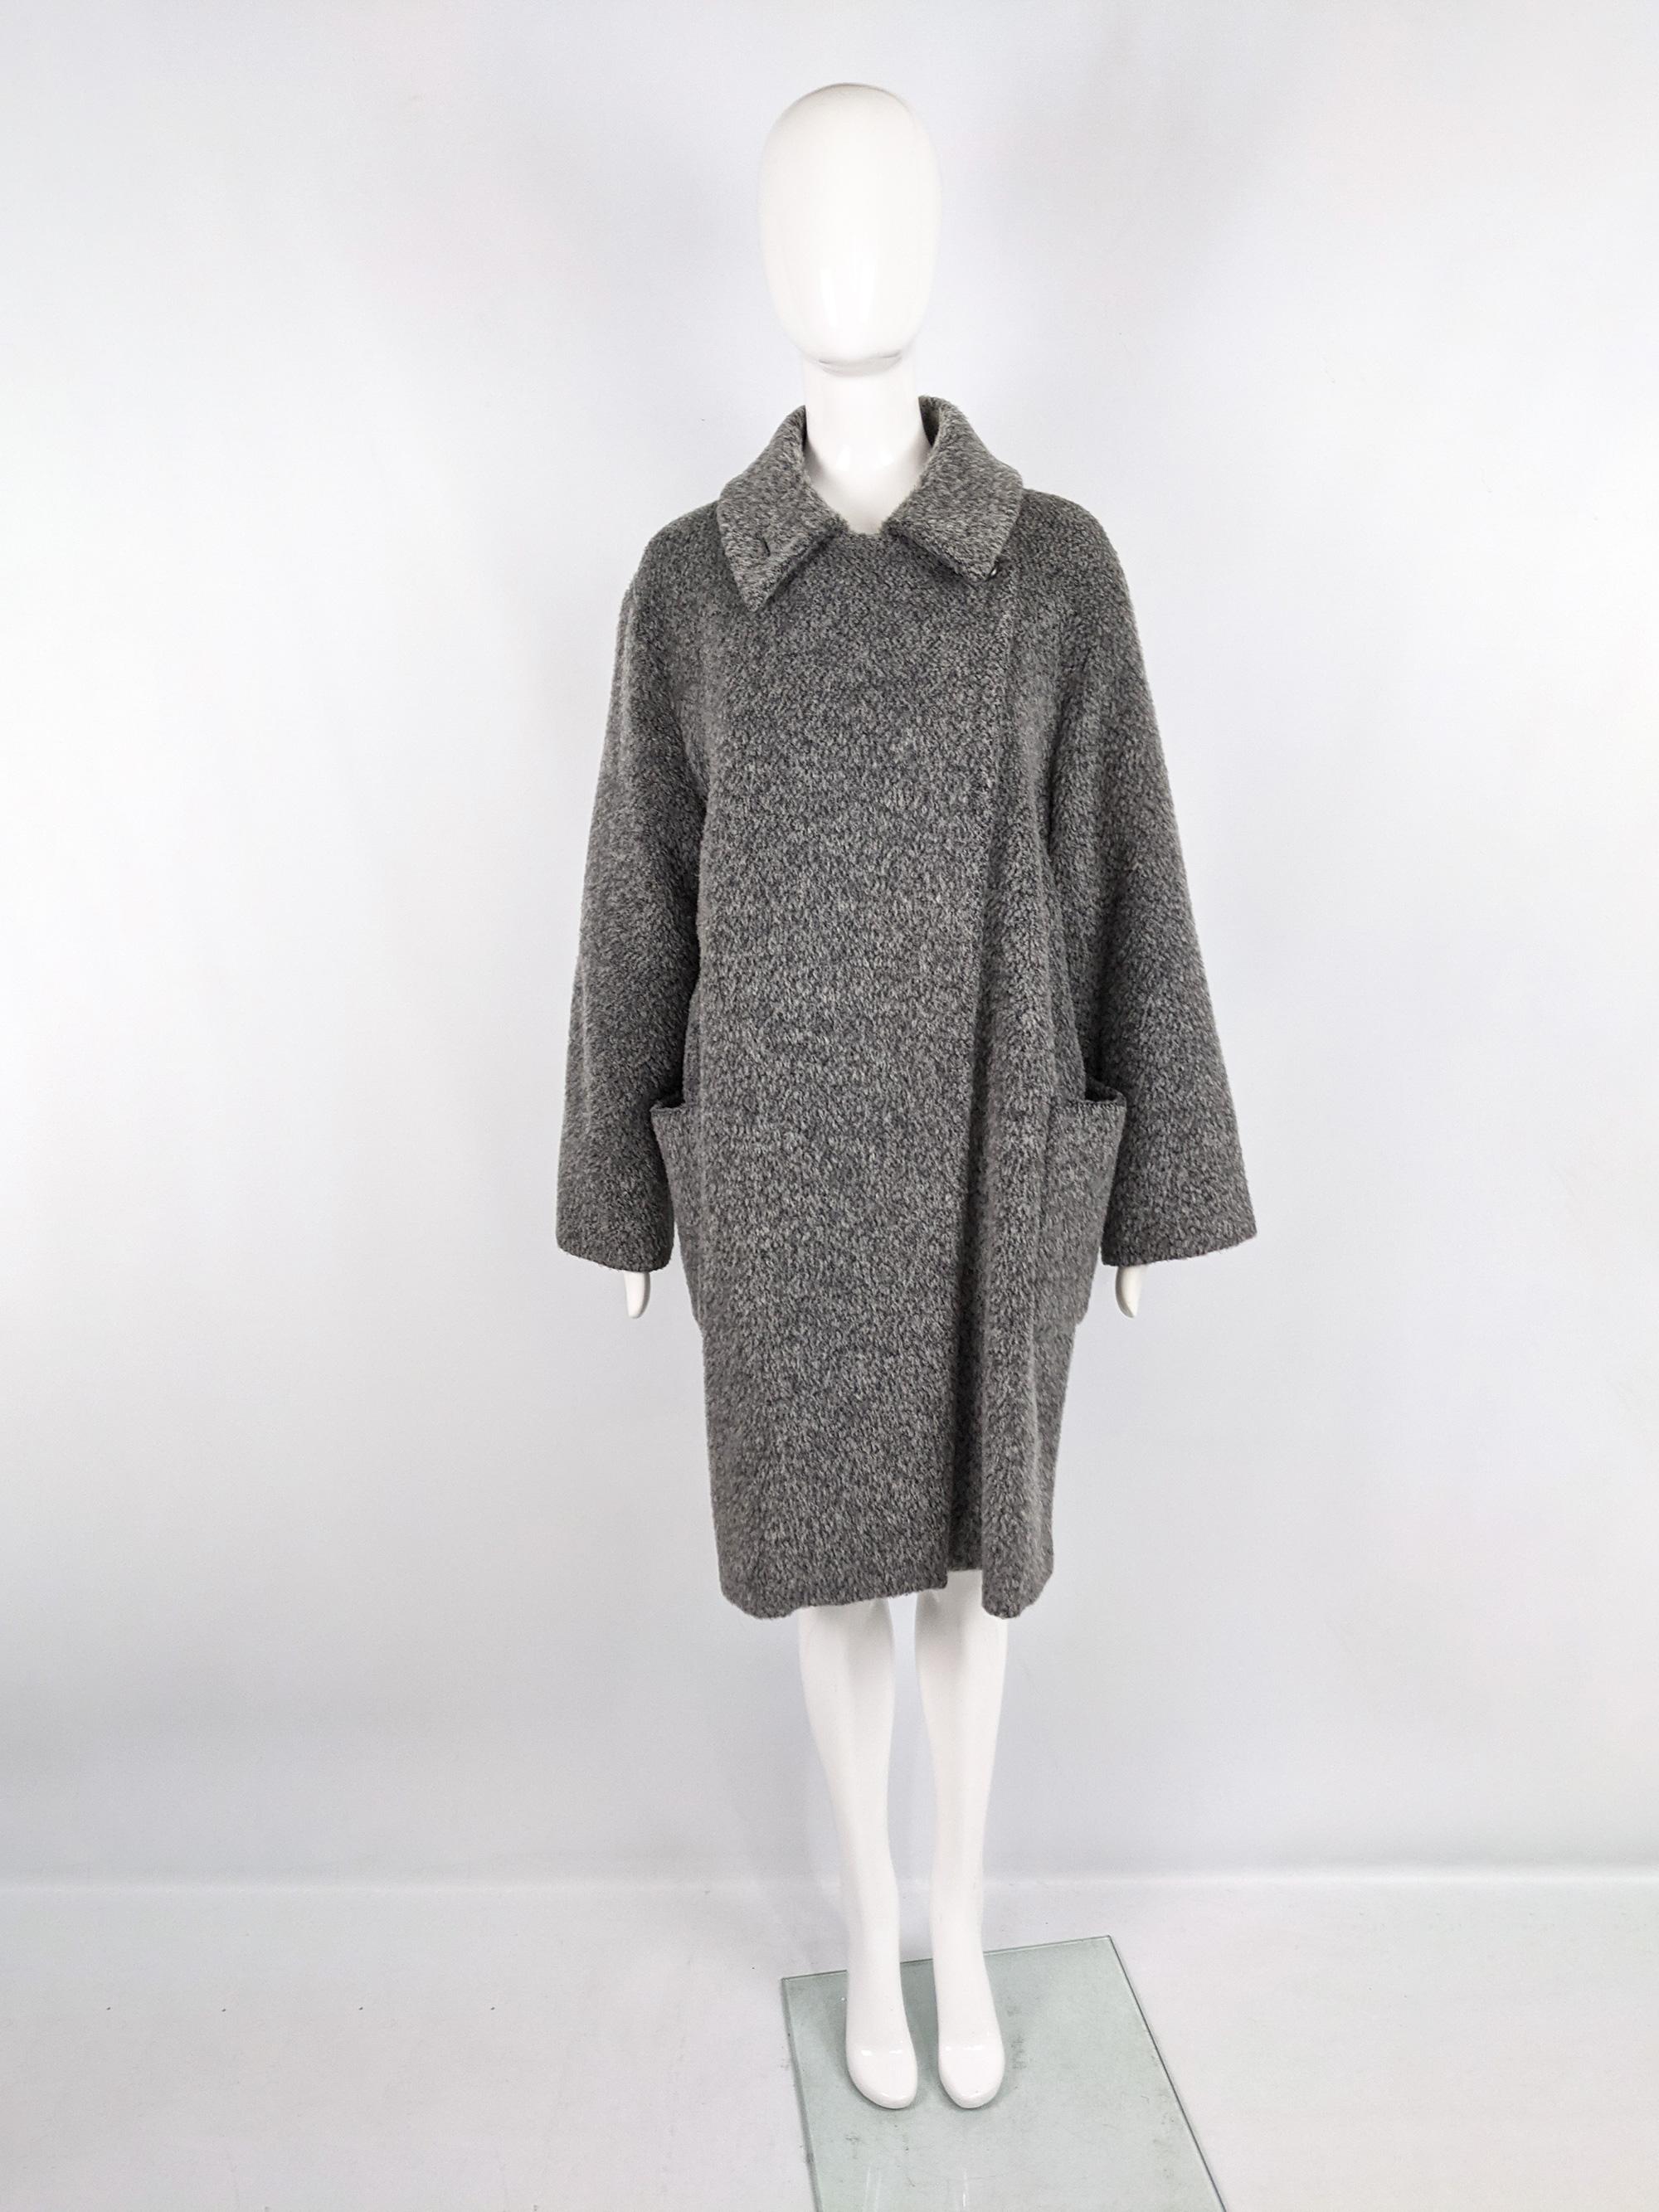 A chic, minimalist womens coat from the 90s by luxury Italian fashion group Max Mara, for their Marella line. Made in Italy, from a luxurious mohair, virgin wool and alpaca blend. It has a minimal feel with a loose, oversized trapeze style cut and